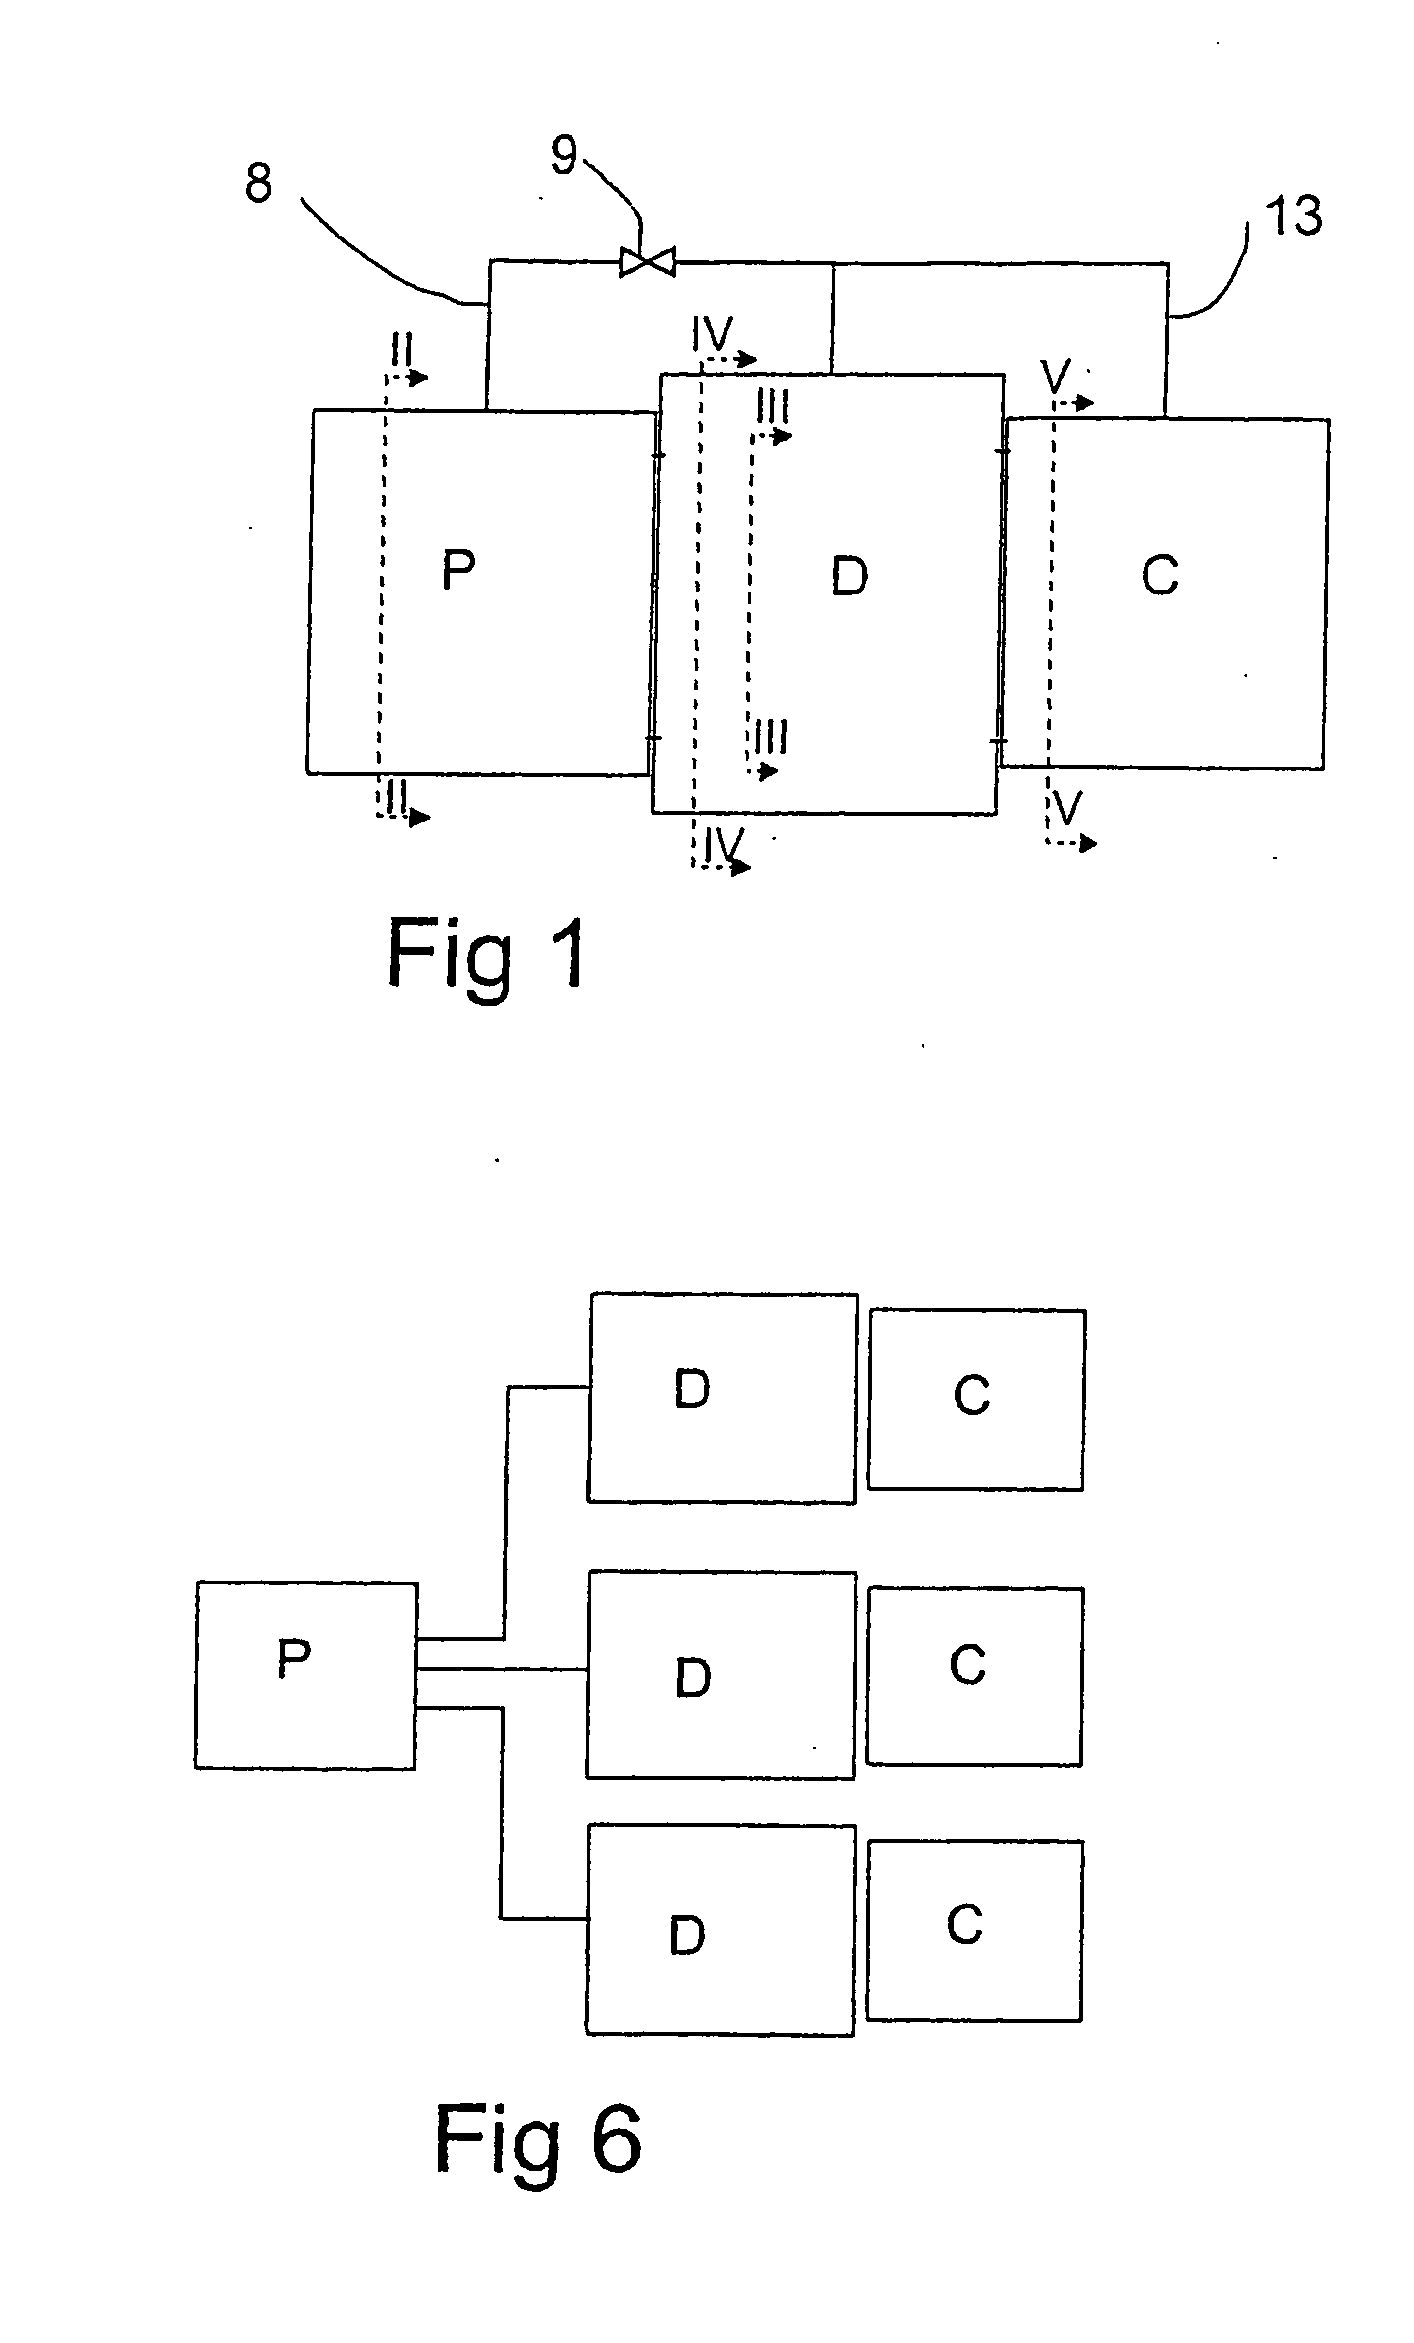 Method and apparatus for the treatment of wood or wood products